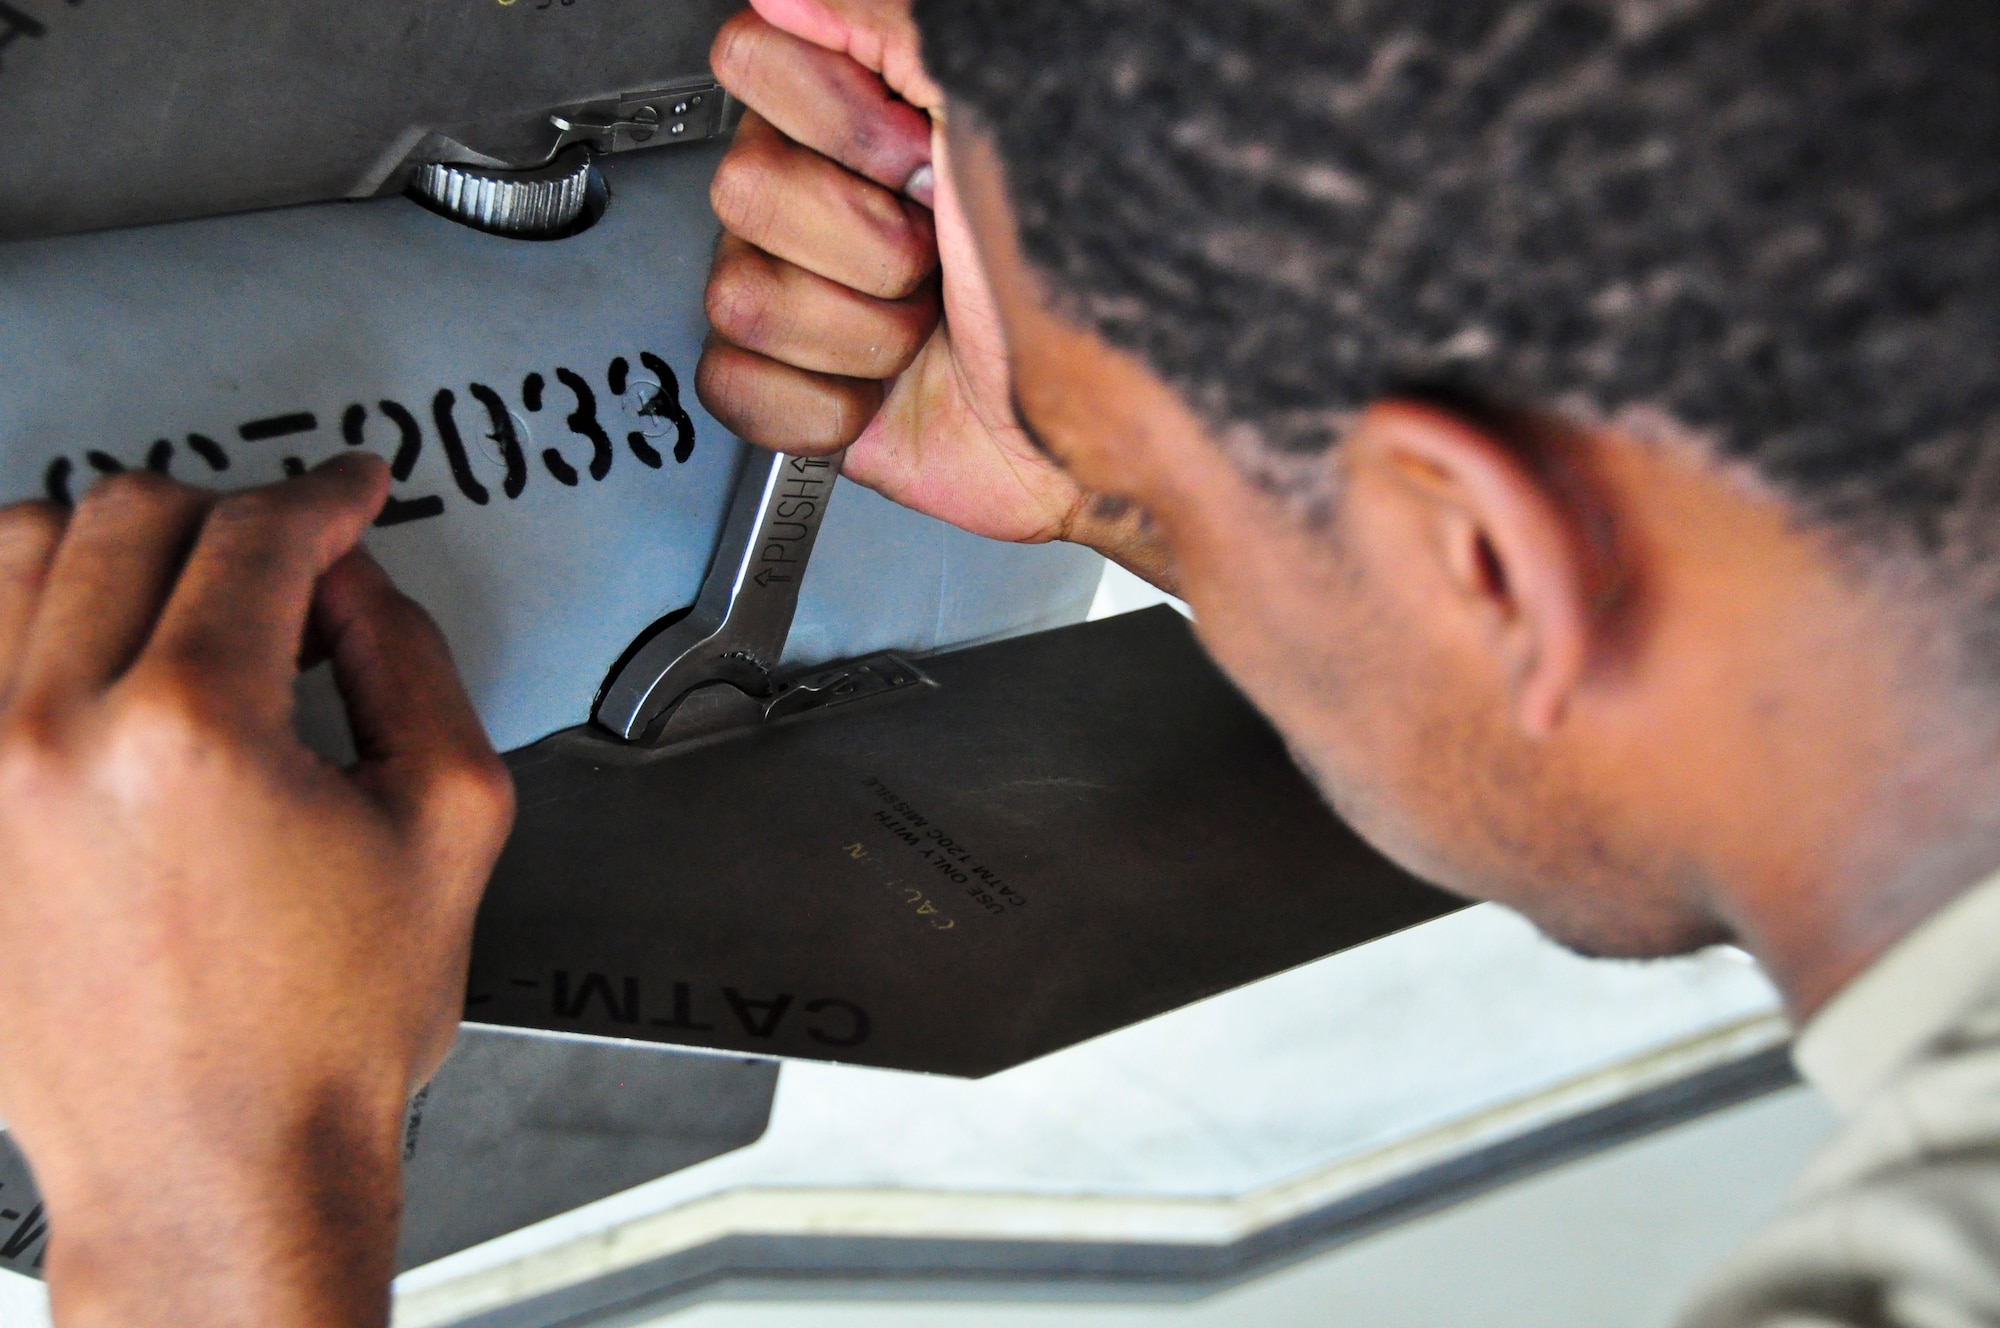 Airman 1st Class Robert Hughes puts the tail fins on to an AIM-120 advanced medium-range air-to-air missile after loading it on to an F-35A Lightning II during a qualification load Oct. 10, 2014, at Eglin Air Force Base, Fla. The F-35 training program at Eglin AFB currently serves as the primary source of F-35 expertise to new F-35A units across the Air Force. The newly qualified crewmembers will continue to hone their skills and become experts at their jobs so they can go train the weapons load crews at those bases receiving the F-35A. Hughes is a load crewmember from the 58th Aircraft Maintenance Unit crew one. (U.S. Air Force photo/Staff Sgt. Marleah Robertson)